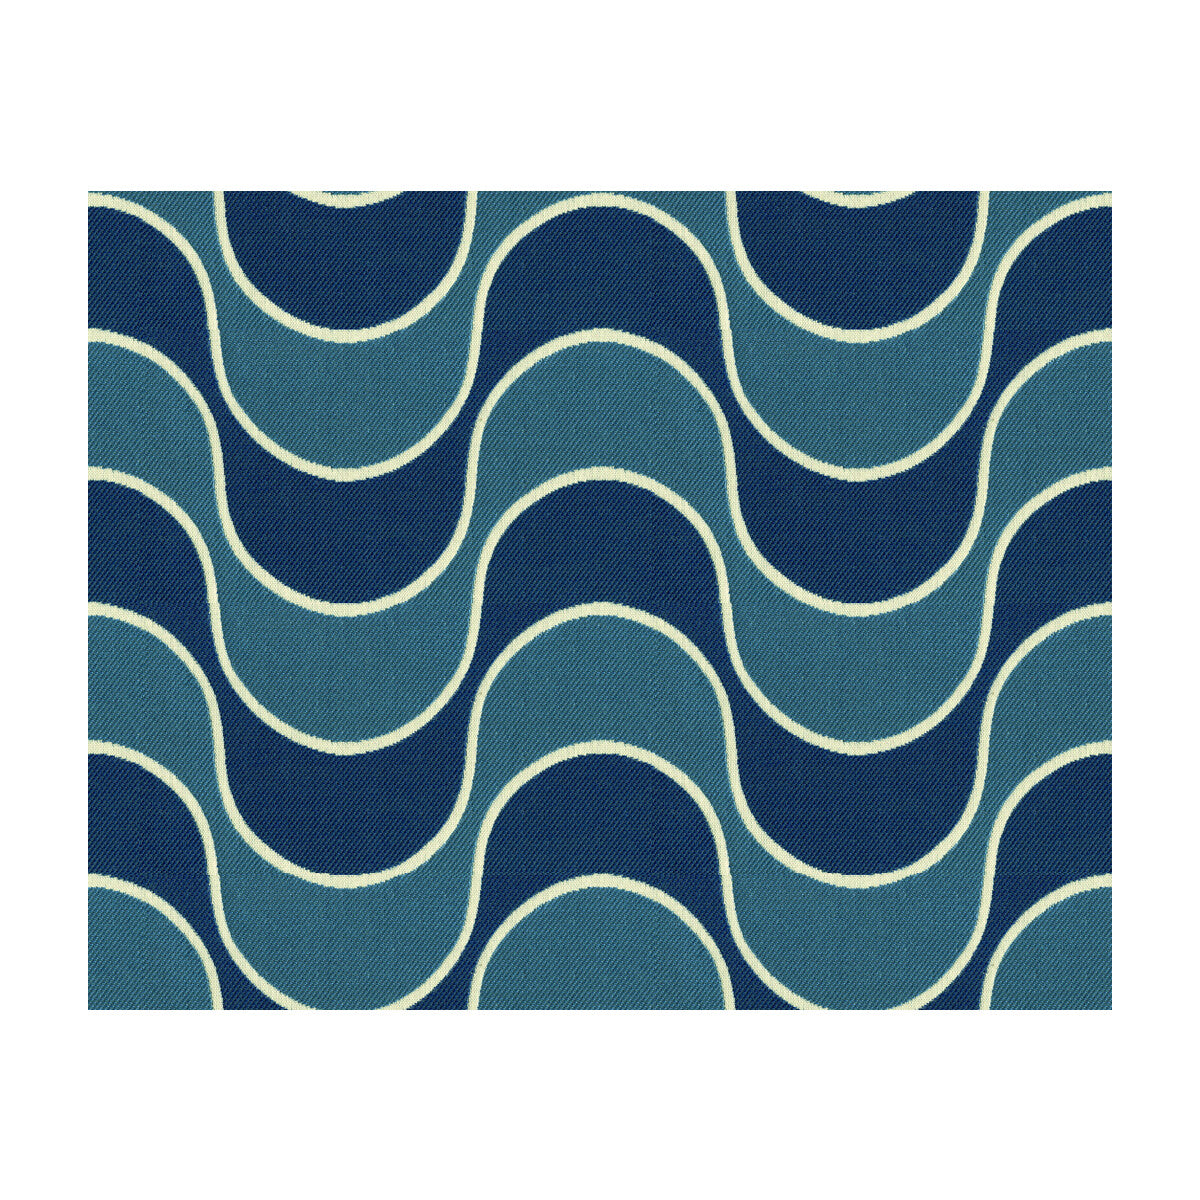 Making Waves fabric in admiral color - pattern 33512.5.0 - by Kravet Design in the Waterworks II collection